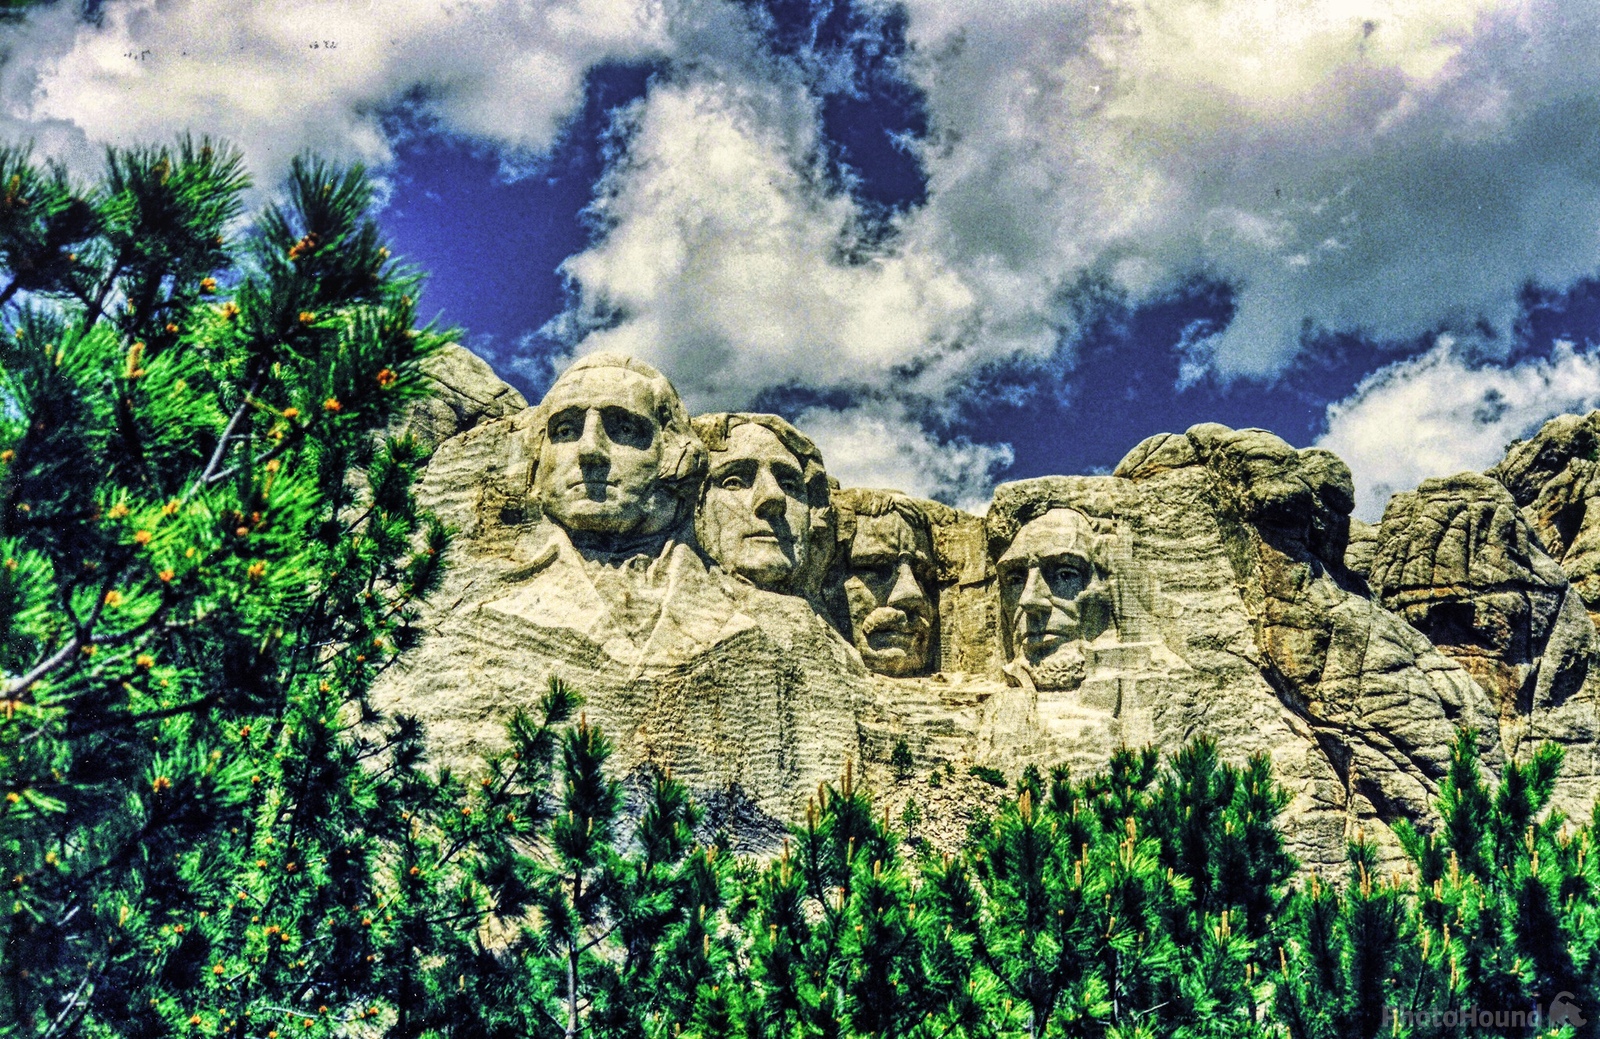 Image of Mount Rushmore National Memorial by William Hess